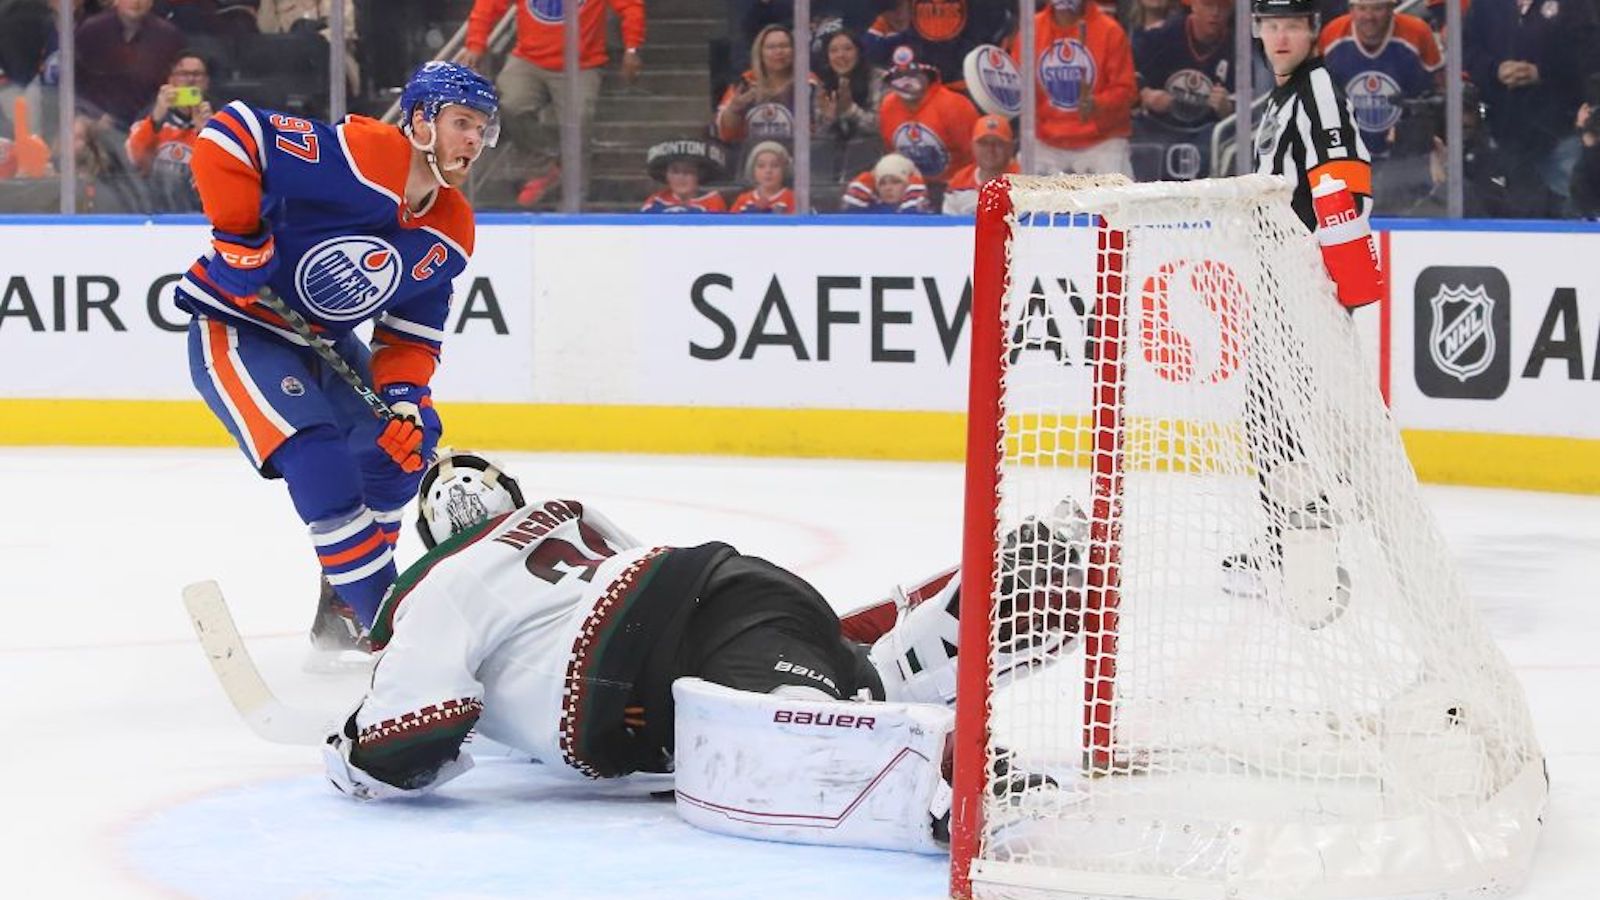 EDMONTON, CANADA - MARCH 22: Connor McDavid #97 of the Edmonton Oilers scores a goal in overtime against the Arizona Coyotes at Rogers Place on March 22, 2023 in Edmonton, Alberta, Canada. The goal is his 60th of the season.